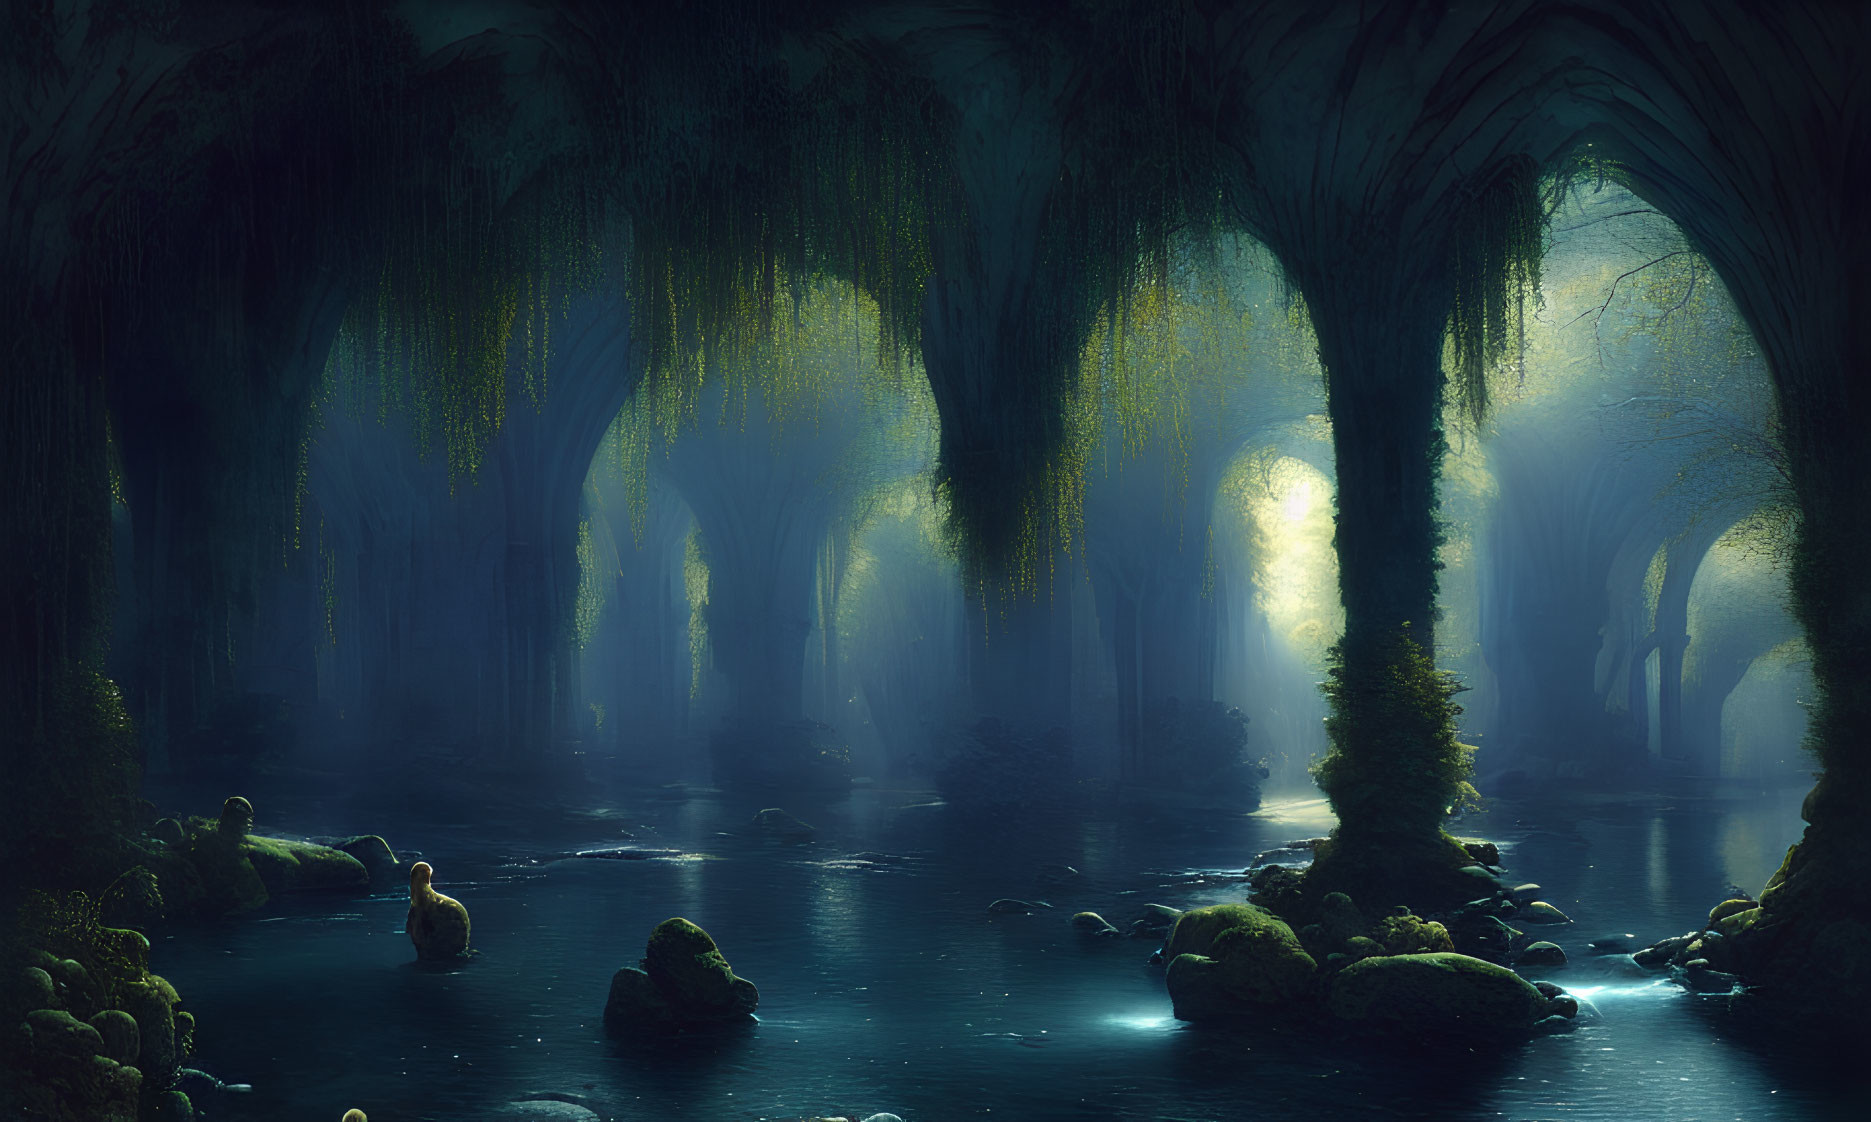 Ethereal forest scene with moss-covered trees and glowing light